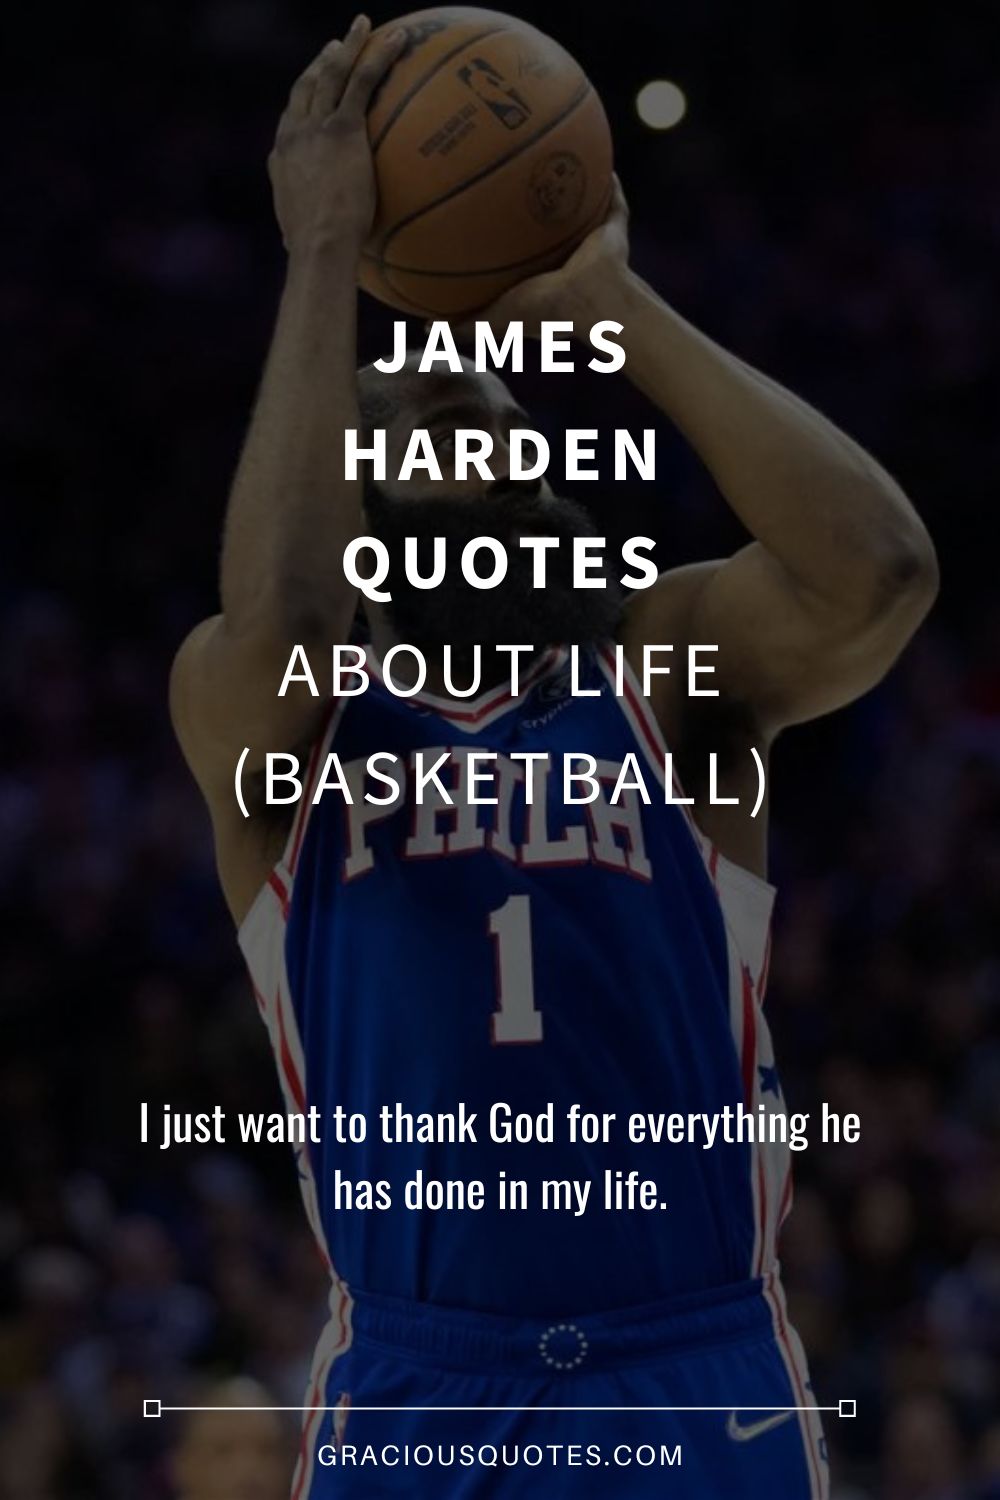 James Harden Quotes About Life (BASKETBALL) - Gracious Quotes